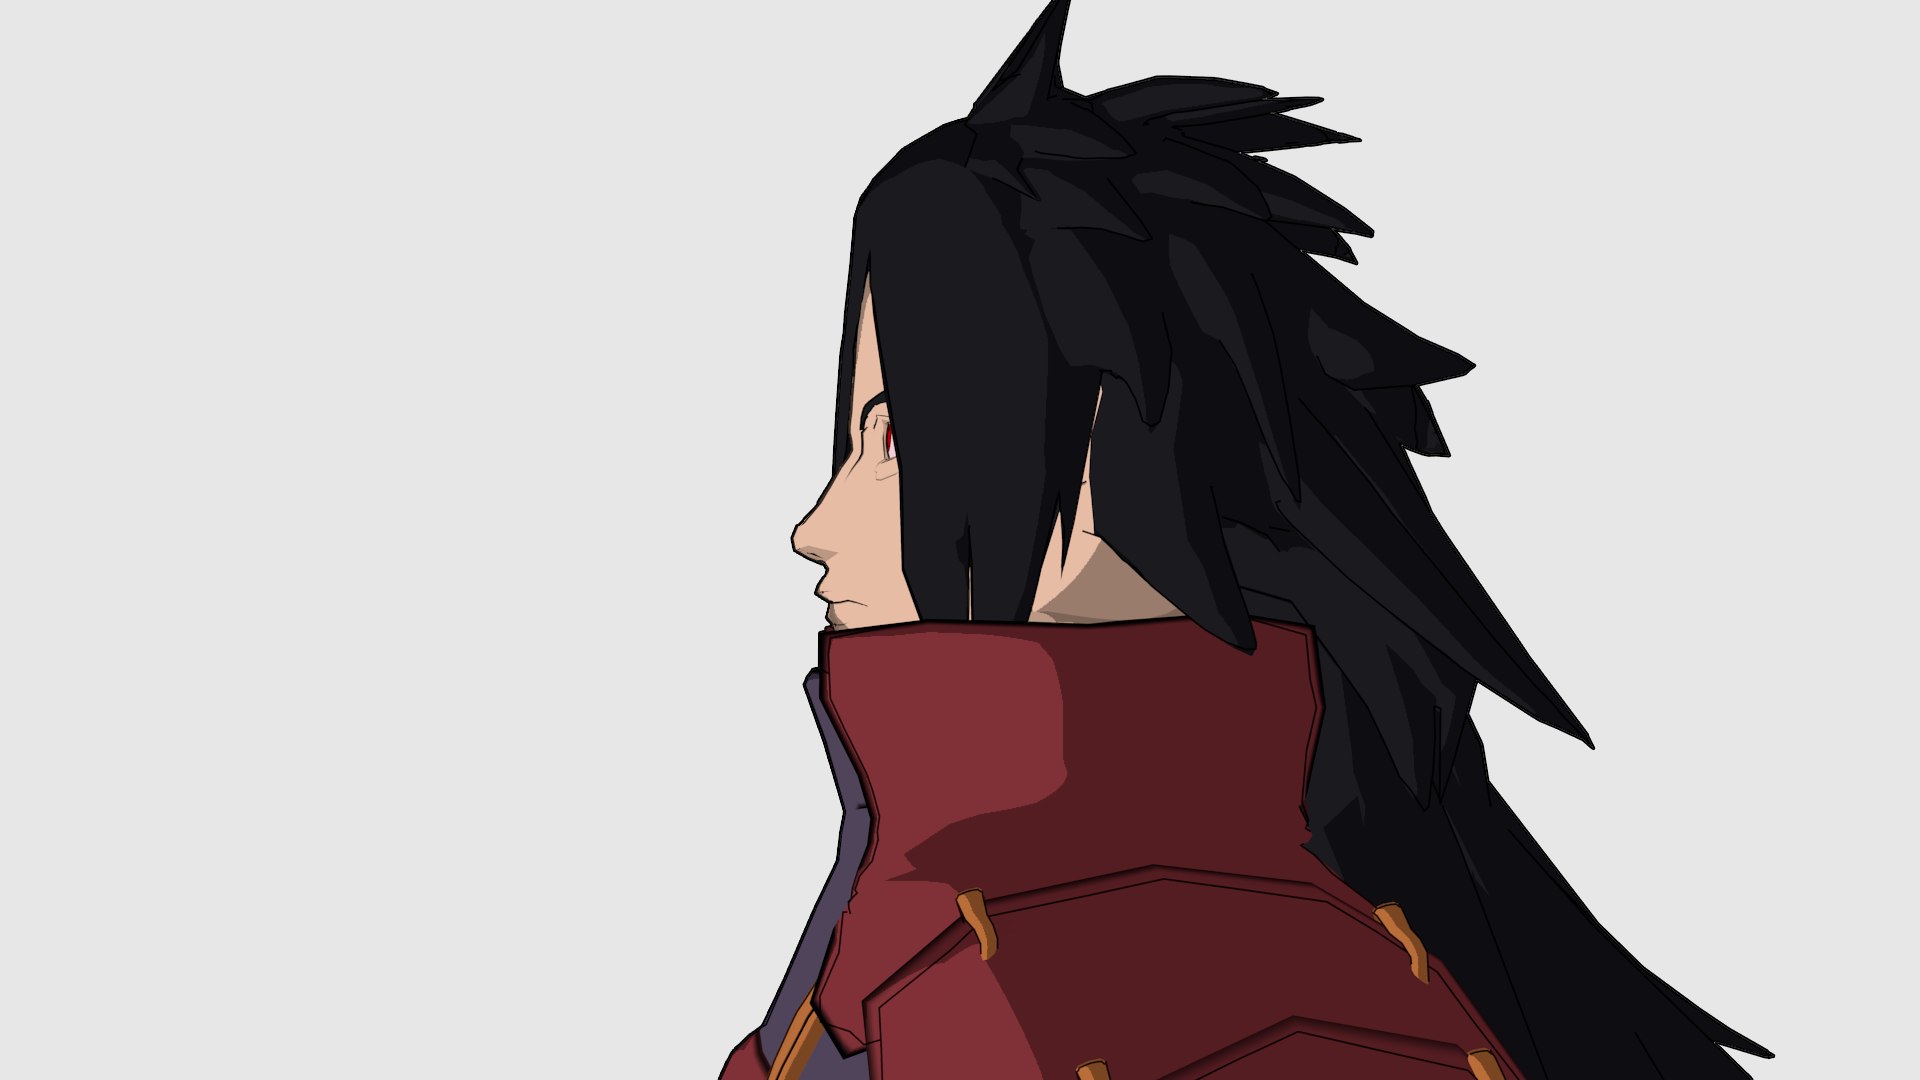 Madara Uchiha sharingan 3D model: Upgrade your collection with the stunning 3D model of Madara Uchiha with his iconic Sharingan. Experience the ultimate level of detail and bring to life the power of the legendary Uchiha Clan in the comfort of your own home.